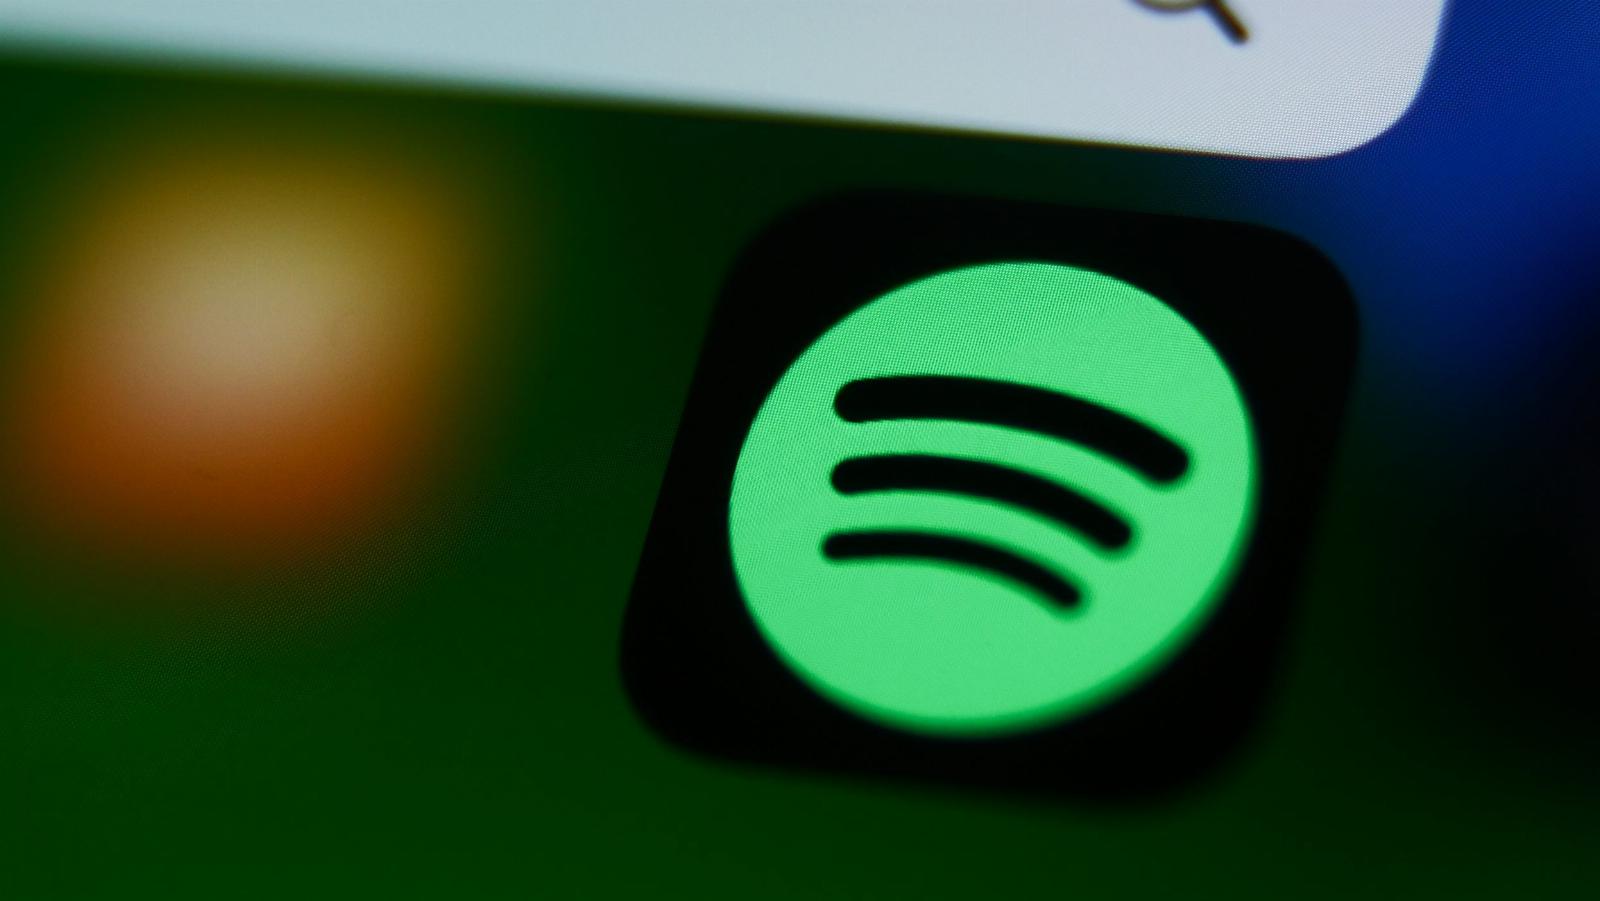 Spotify teases in-app purchases for EU iPhone users ahead of incoming DMA regulation